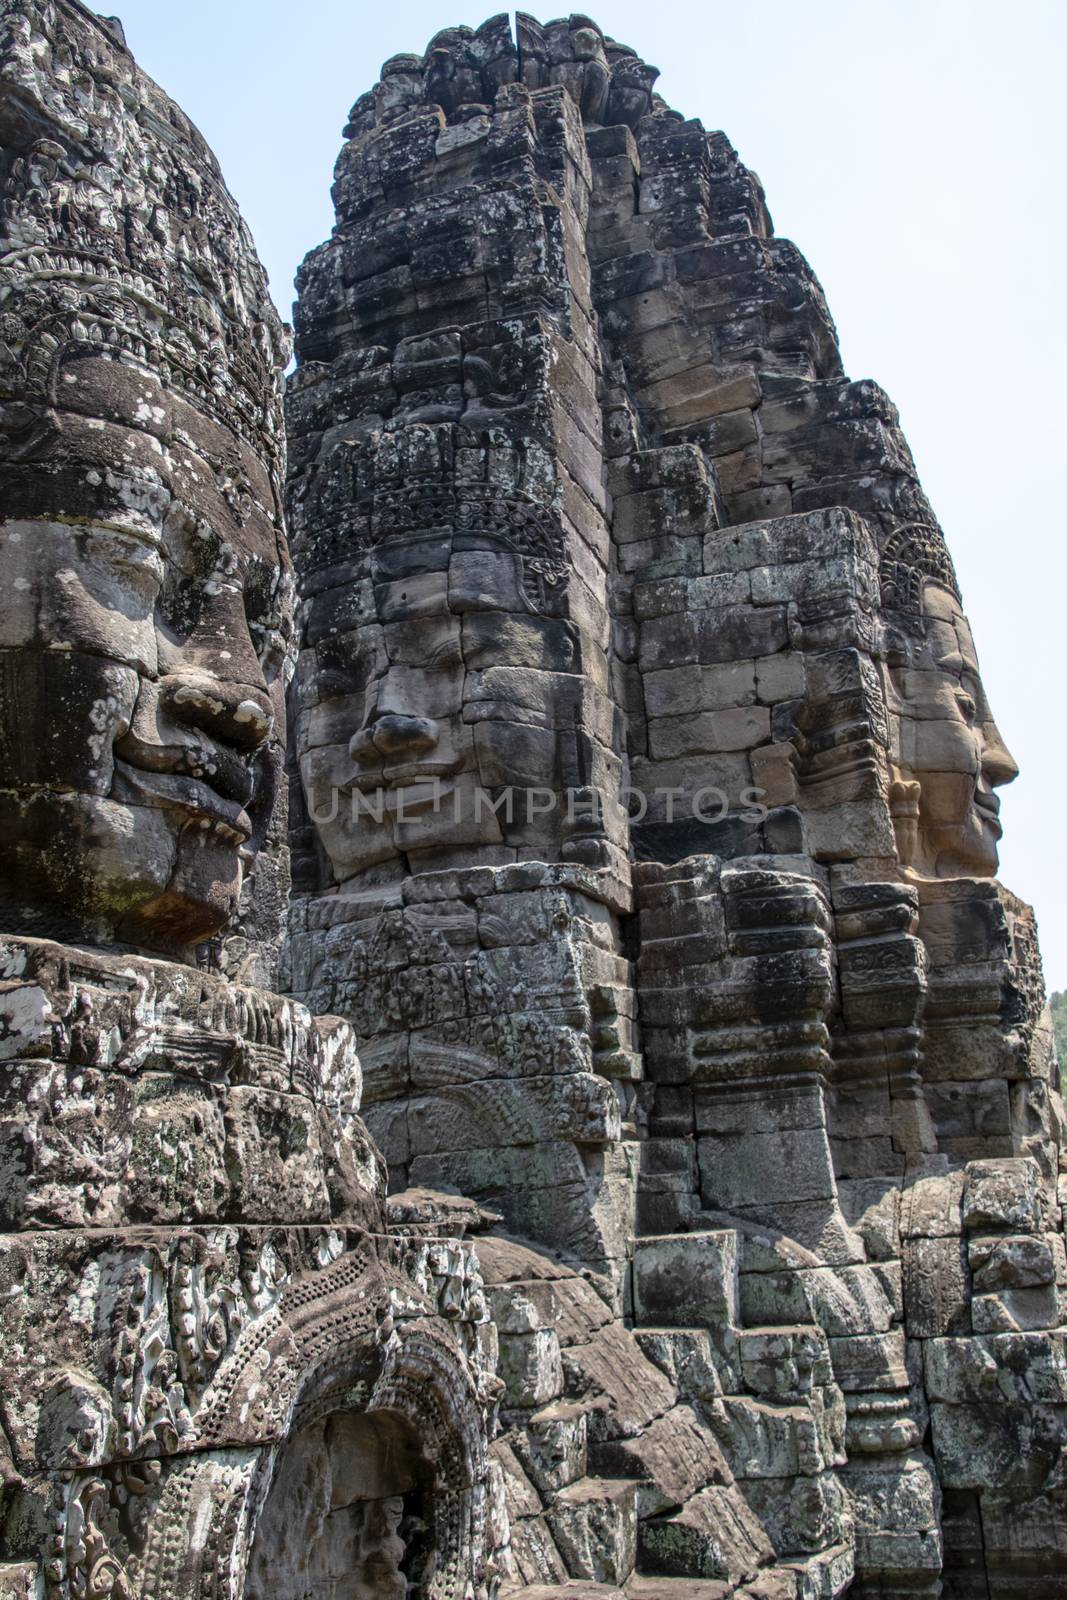 Cambodia, Bayon Temple - March 2016: Bayon is remarkable for the 216 serene and smiling stone faces on the many towers jutting out from the high terrace and cluster around the central peak